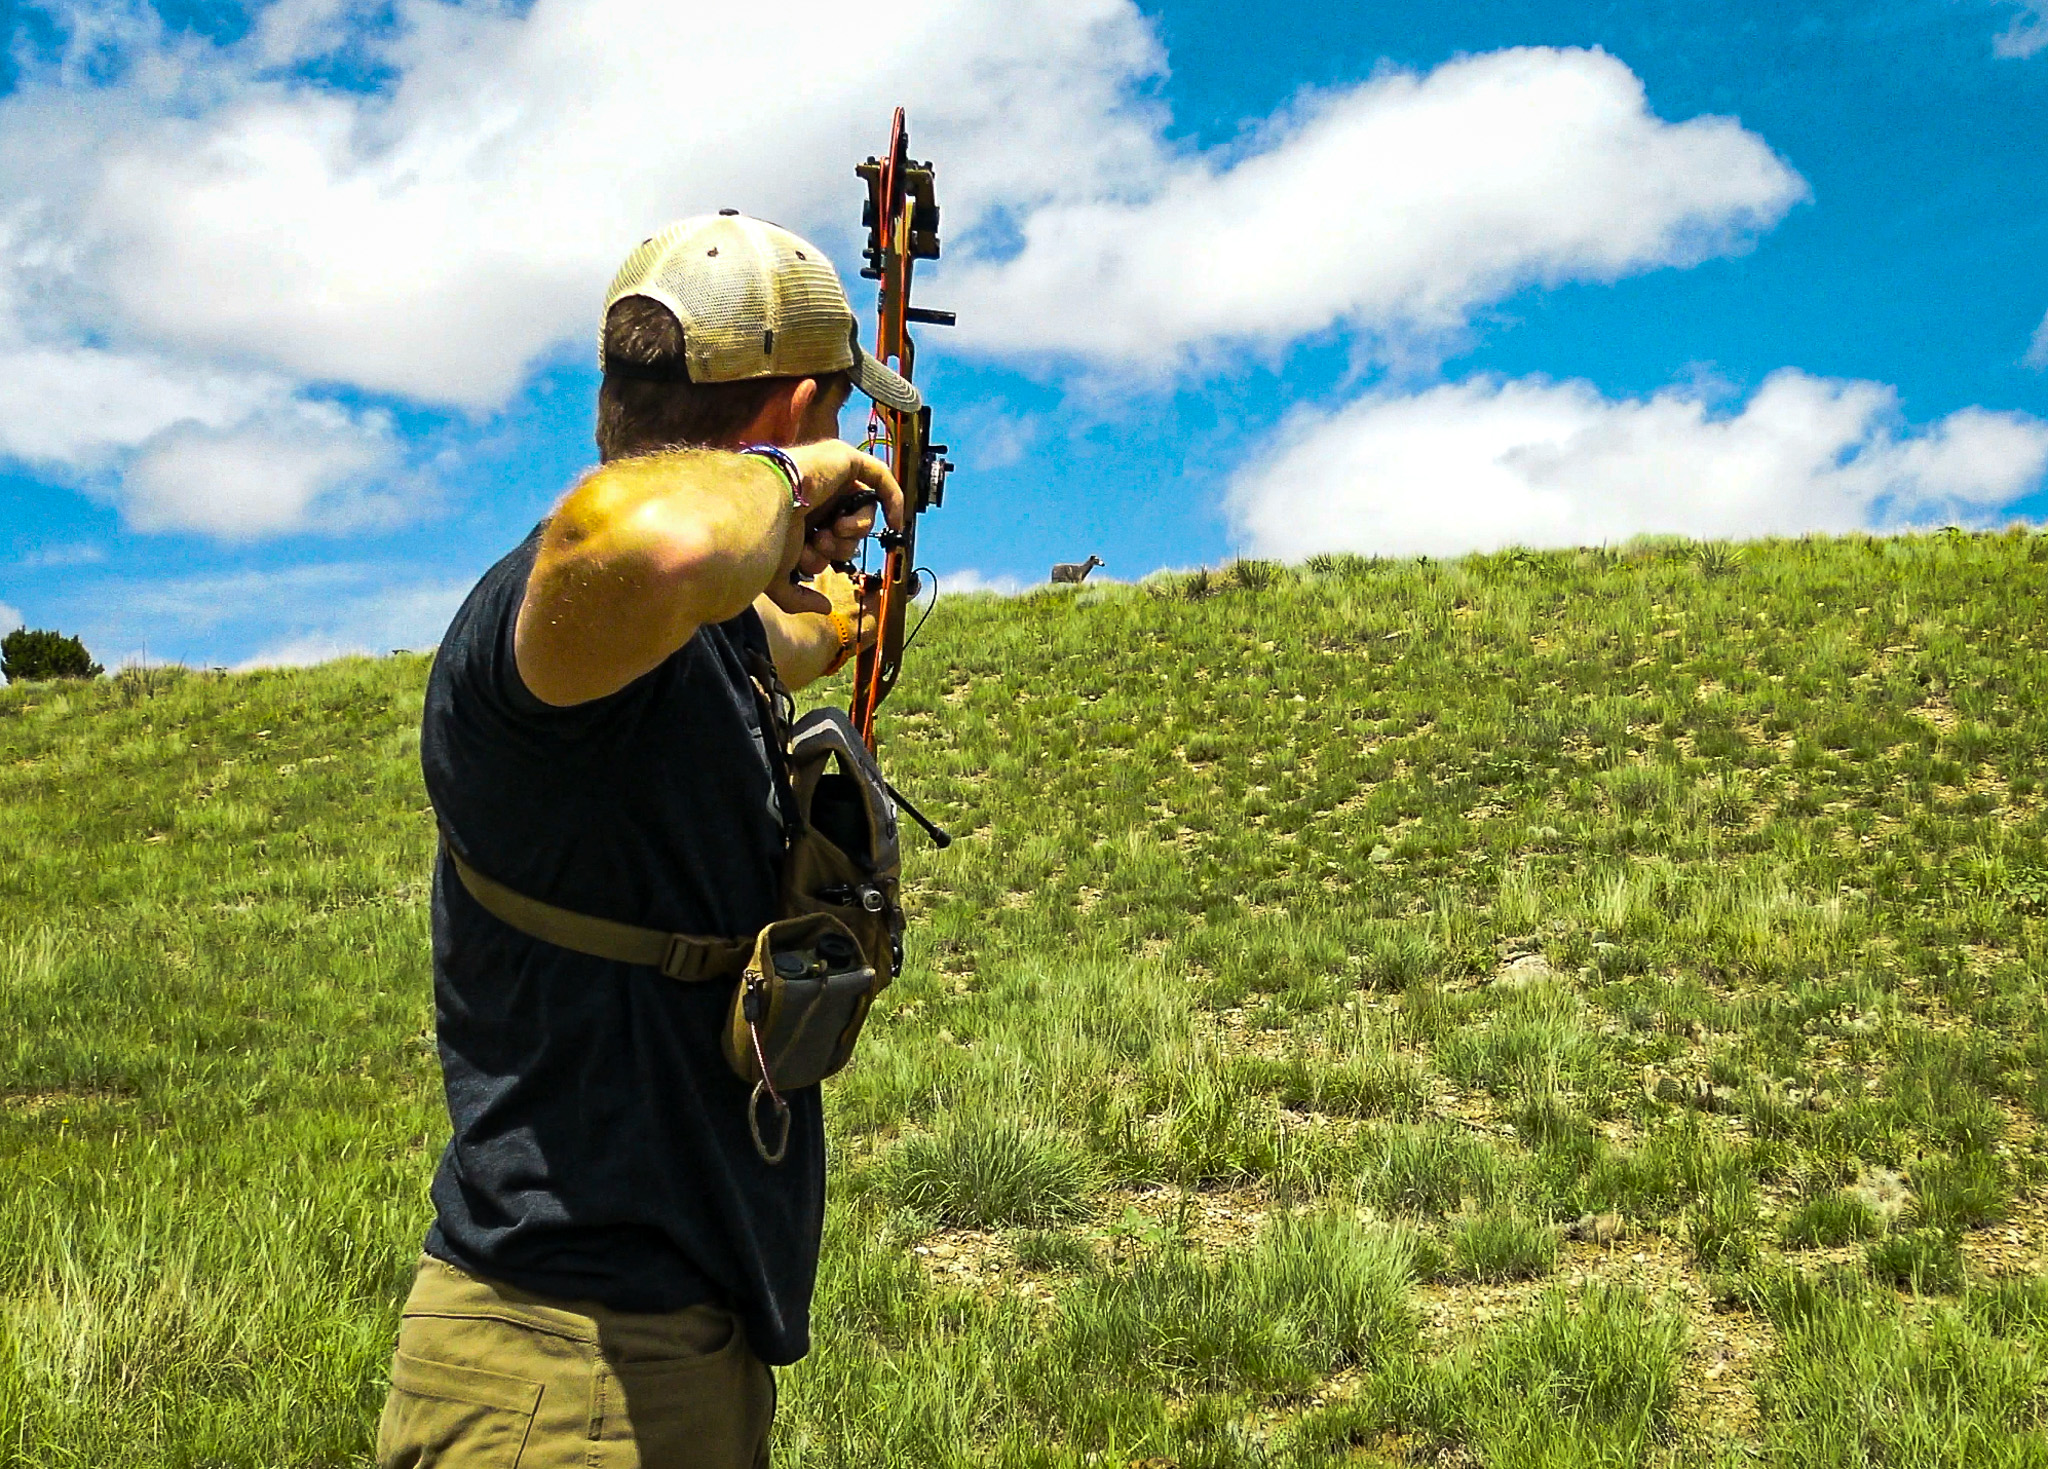 Three Bow Shooting Games That Will Get You Ready For Fall